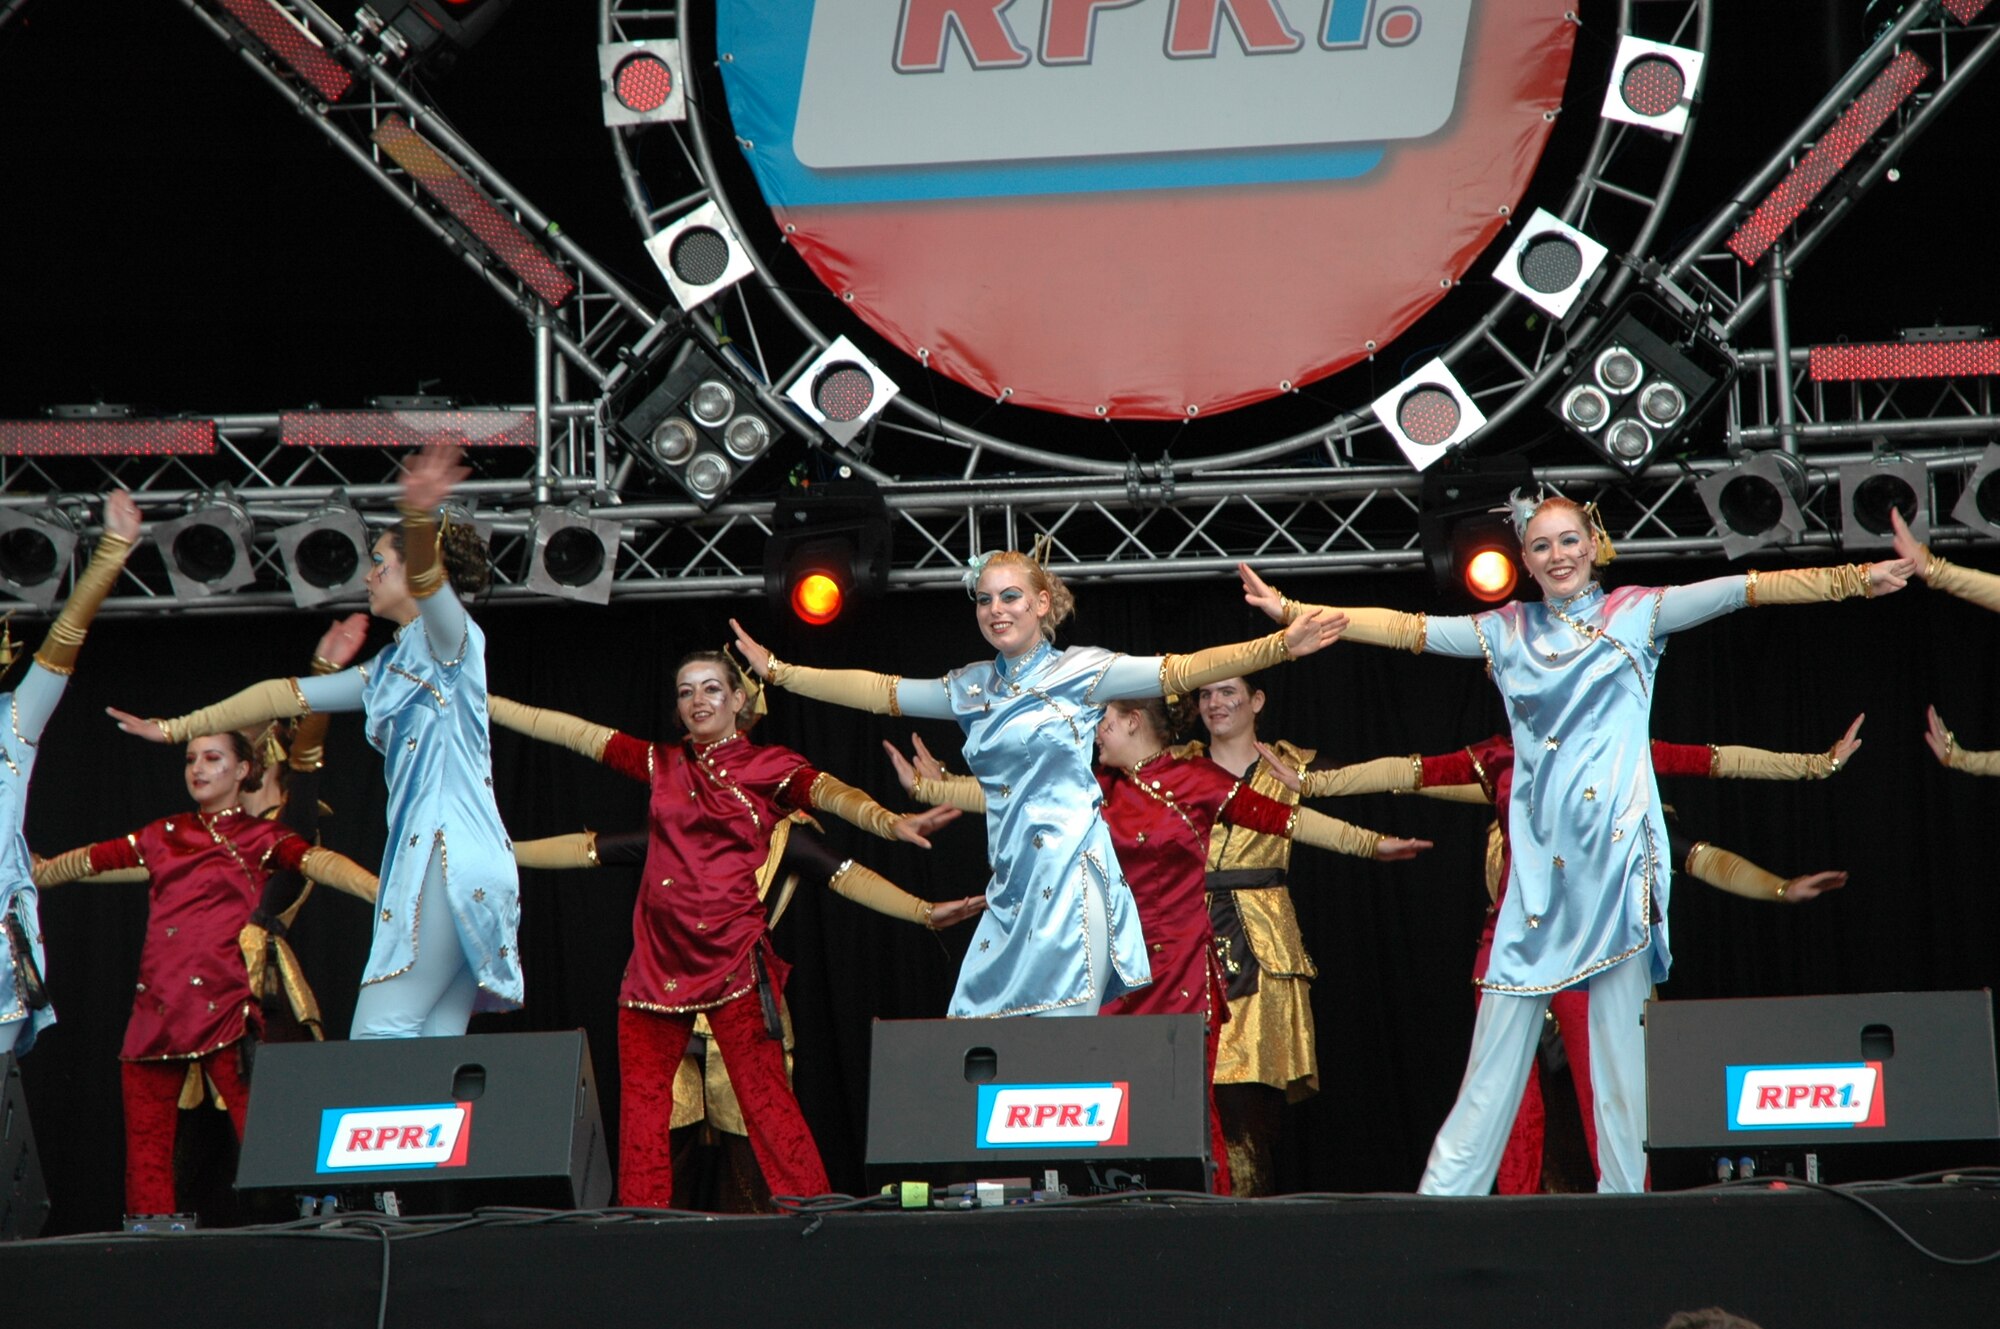 SPANGDAHLEM AIR BASE, Germany -- Asian dancers perform at the 2008 Bad Neuenahr Rheinland-Pfalz festival. This year, 13 stages will be set up throughout the city of Neustadt an der Weinstrasse for the event where people can enjoy listening to a concert or observe shows, dances and athletic performances. (U.S. Air Force photo/Iris Reiff)